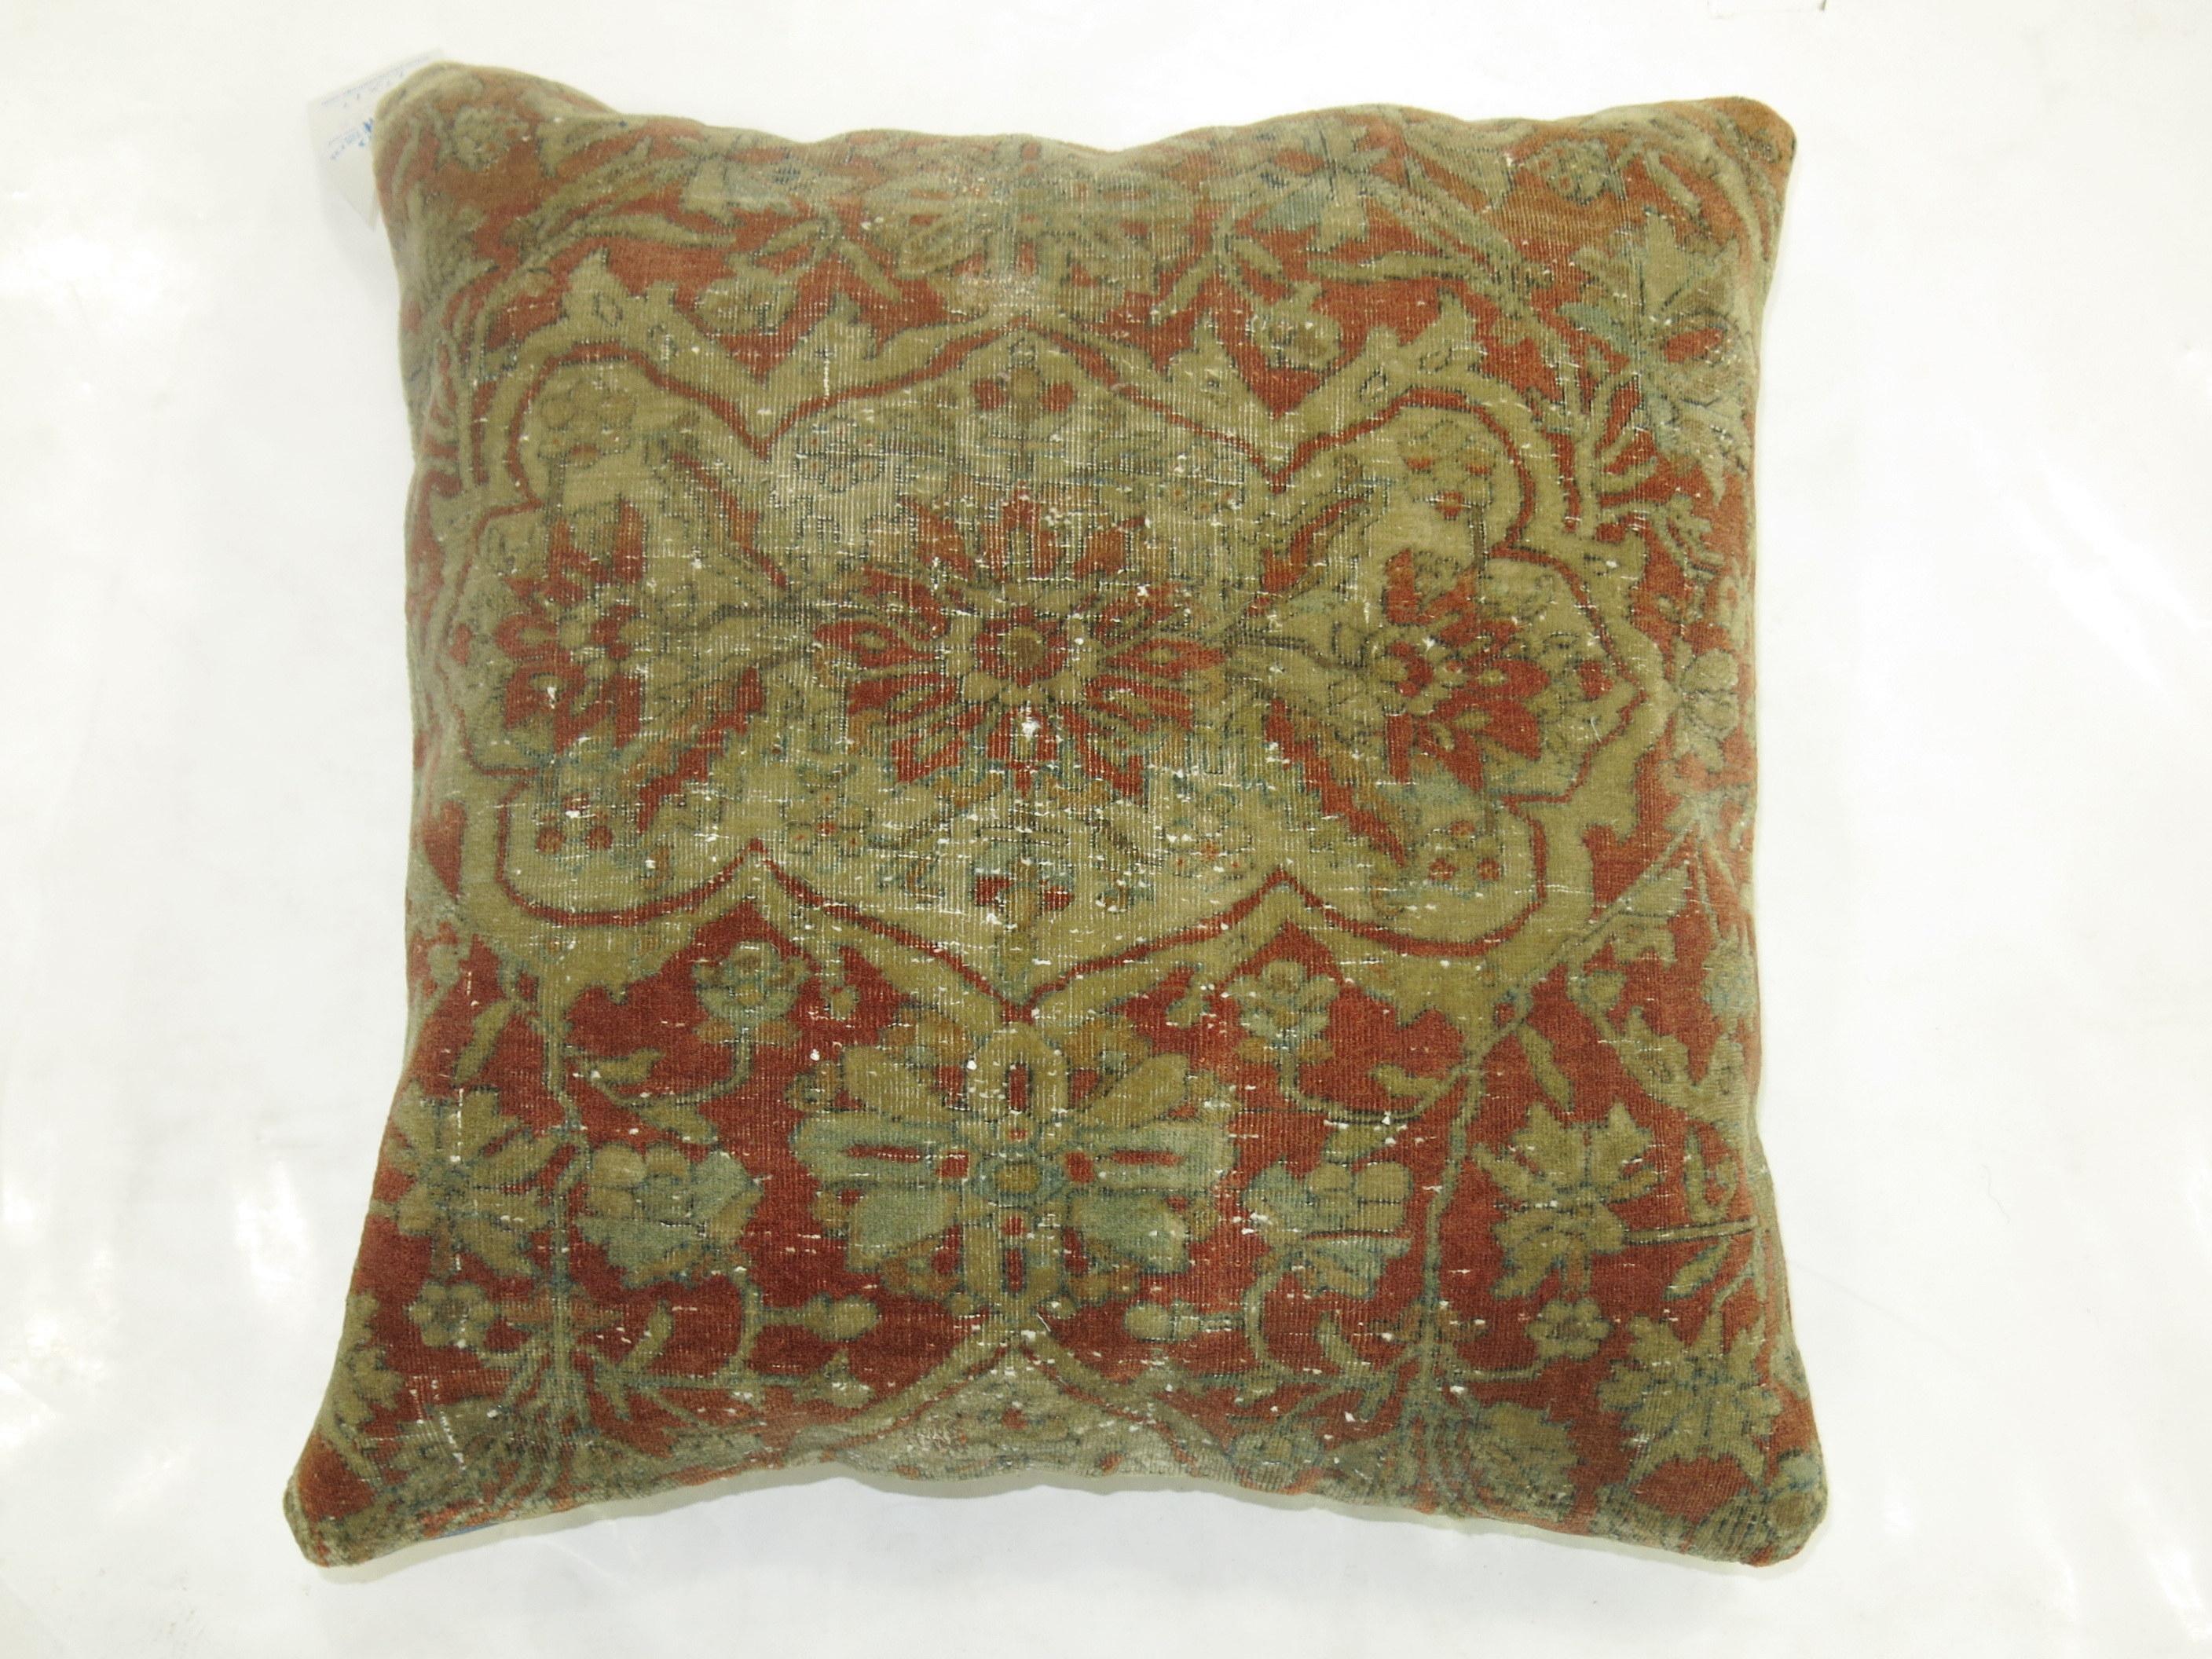 Agra Exquisite Mohtasham Kashan Rug Pillow For Sale